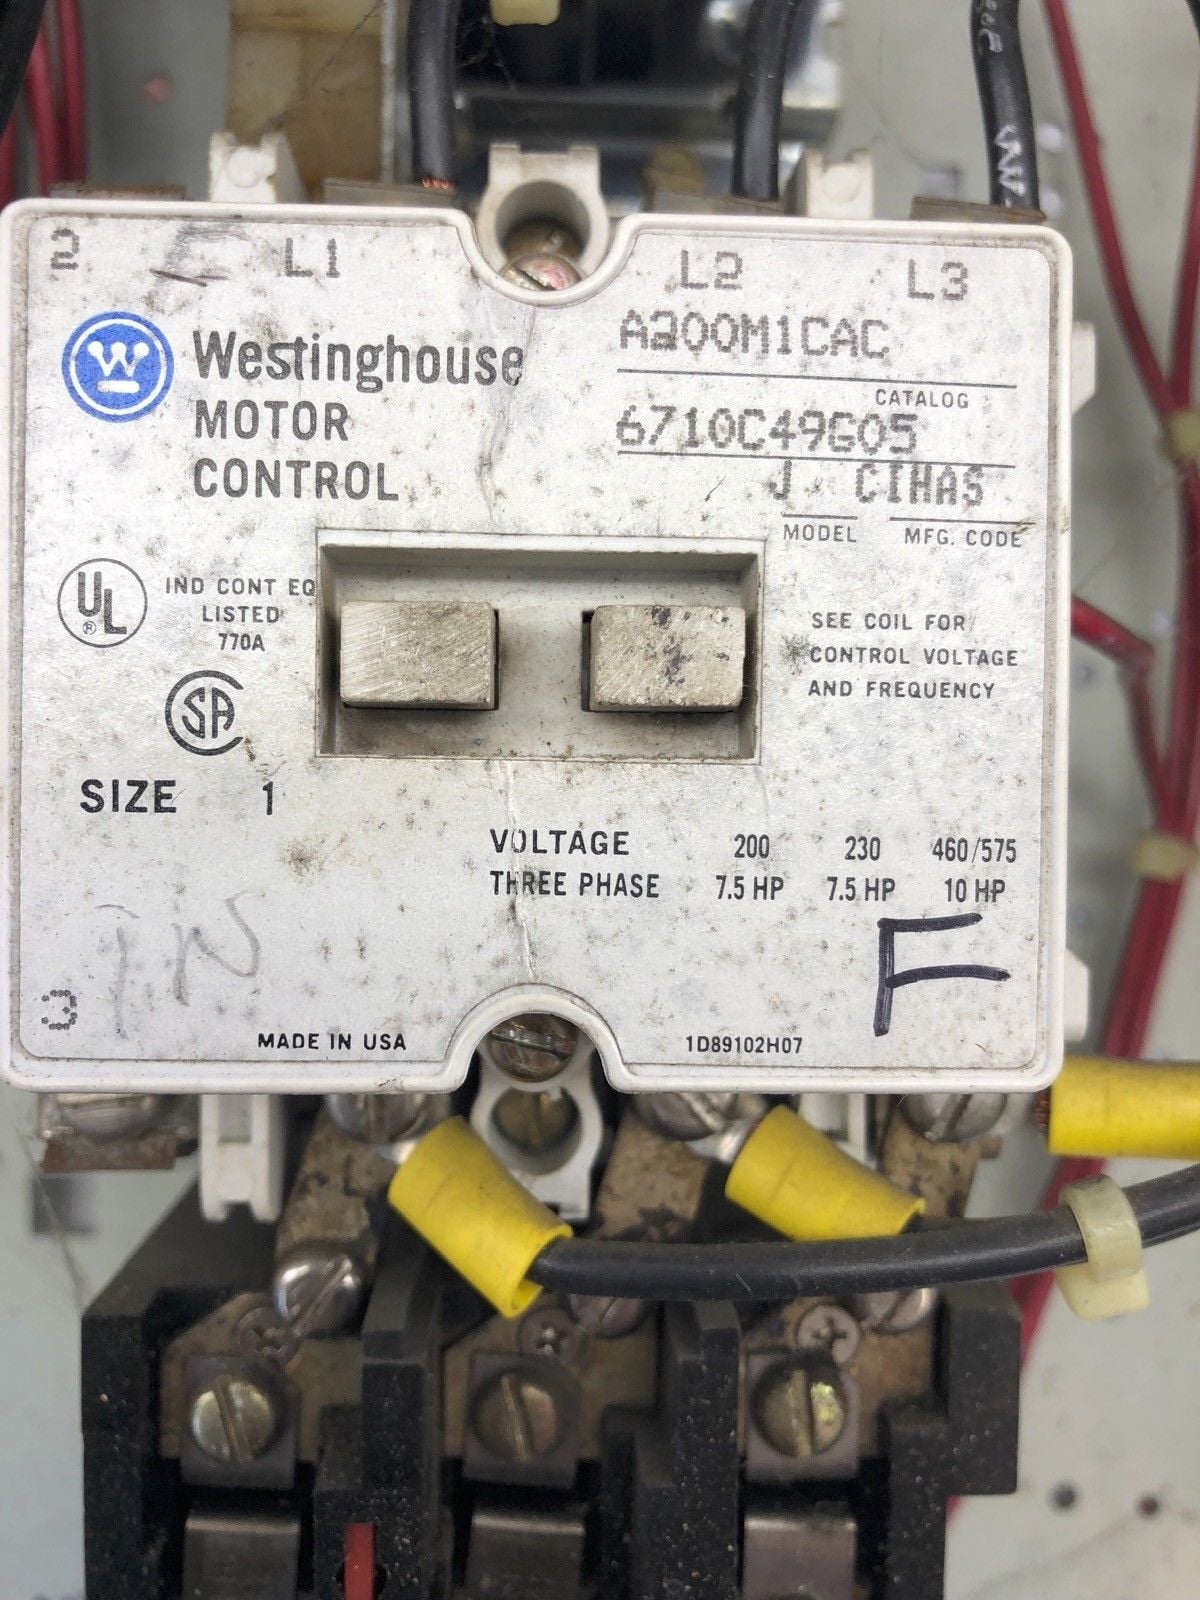 Westinghouse A201K1CA Industrial Control System for sale online 